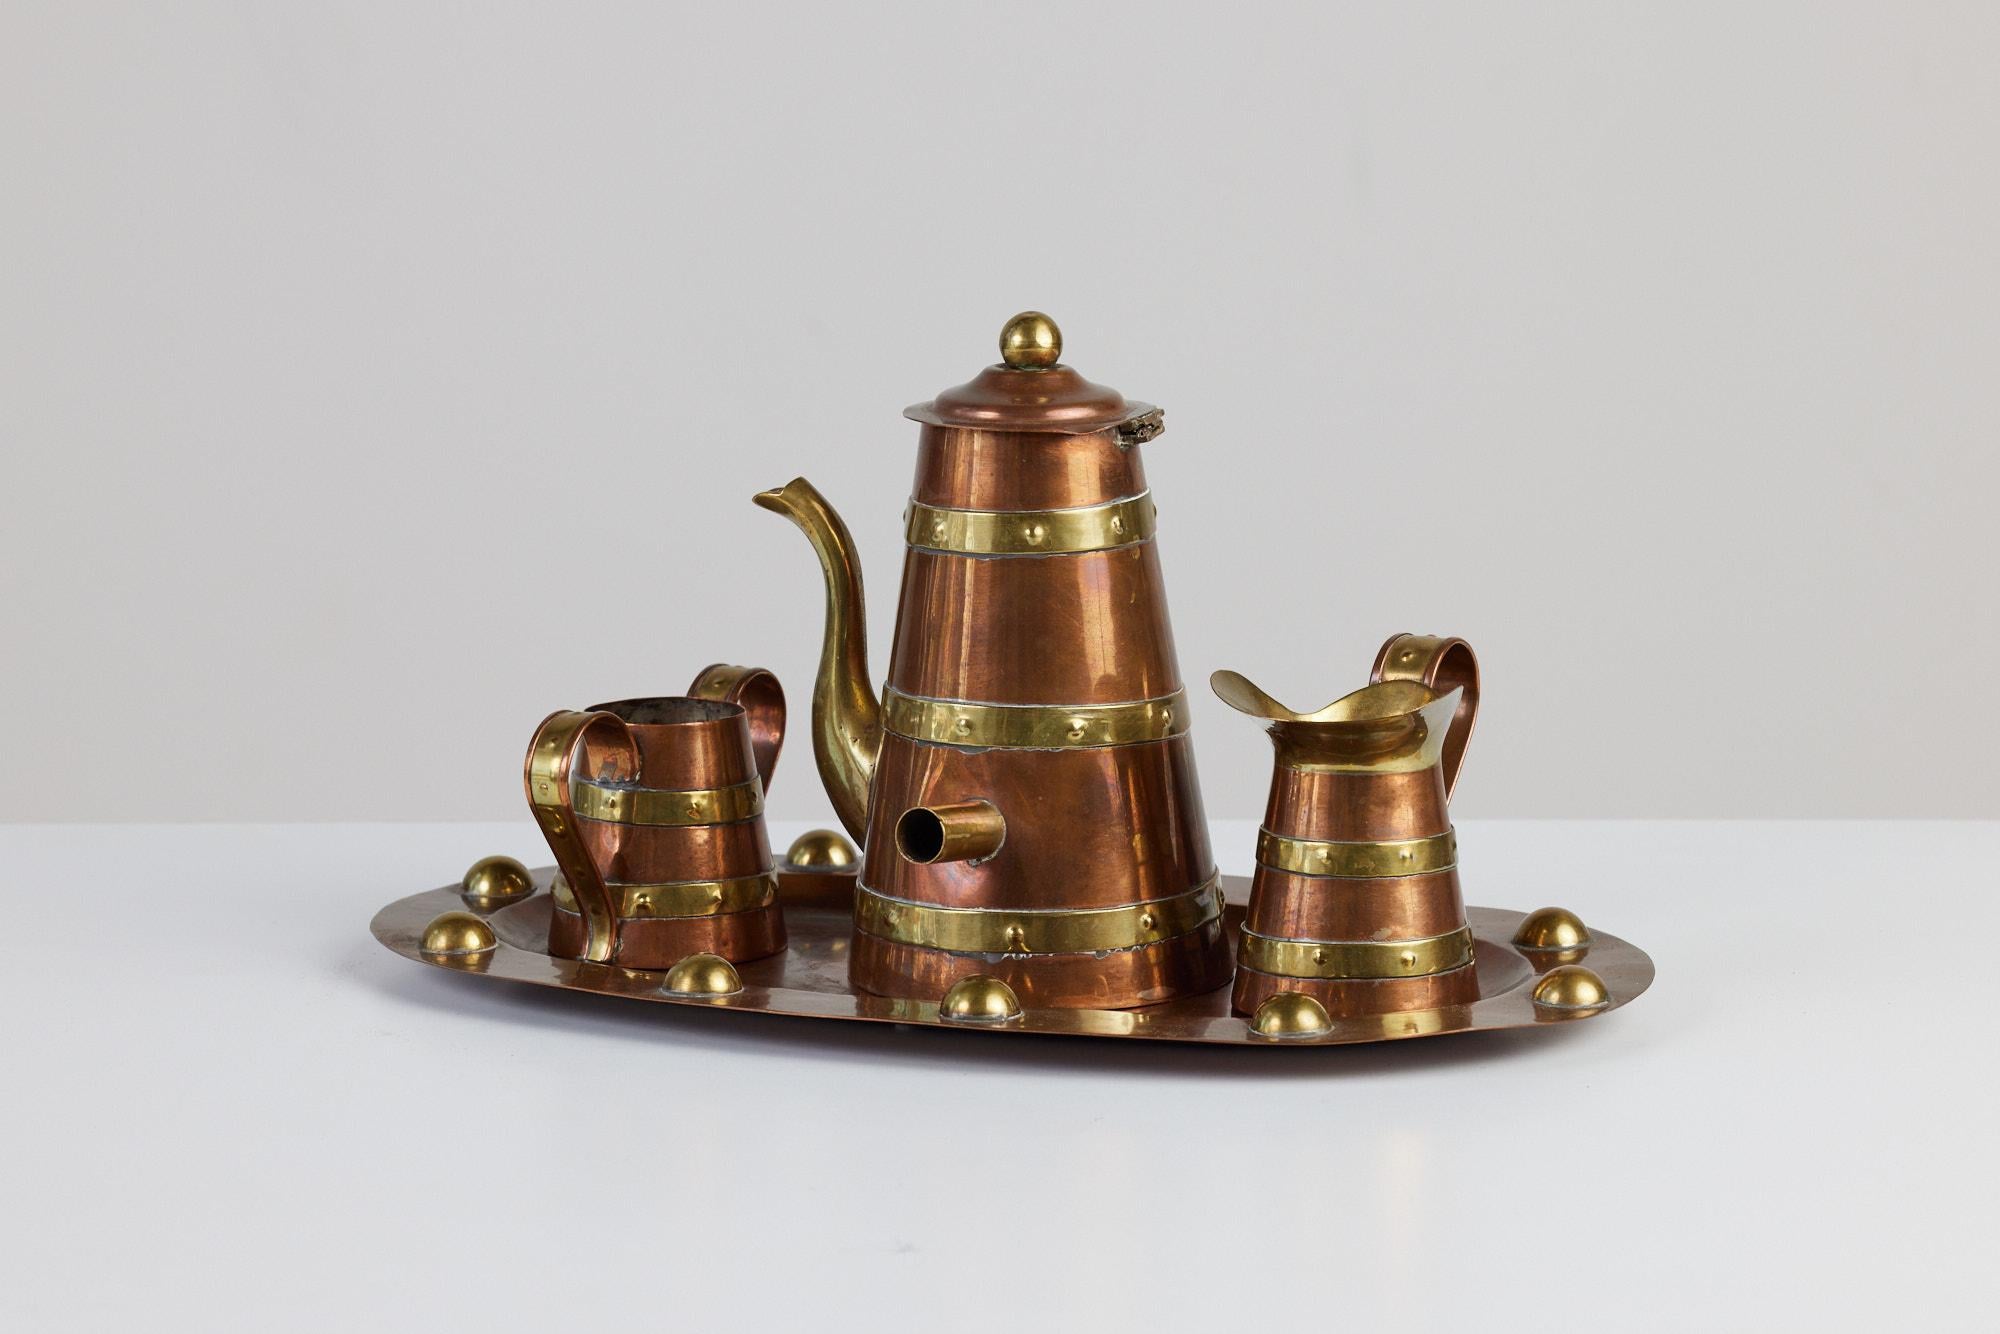 A four piece mid-century brass tea service set by R. Martinez, c.1950s Mexico. The set includes a lidded copper teapot with creamer and sugar pot both with curved handles. All the pieces feature circular textured brass ribbing around the vessels.